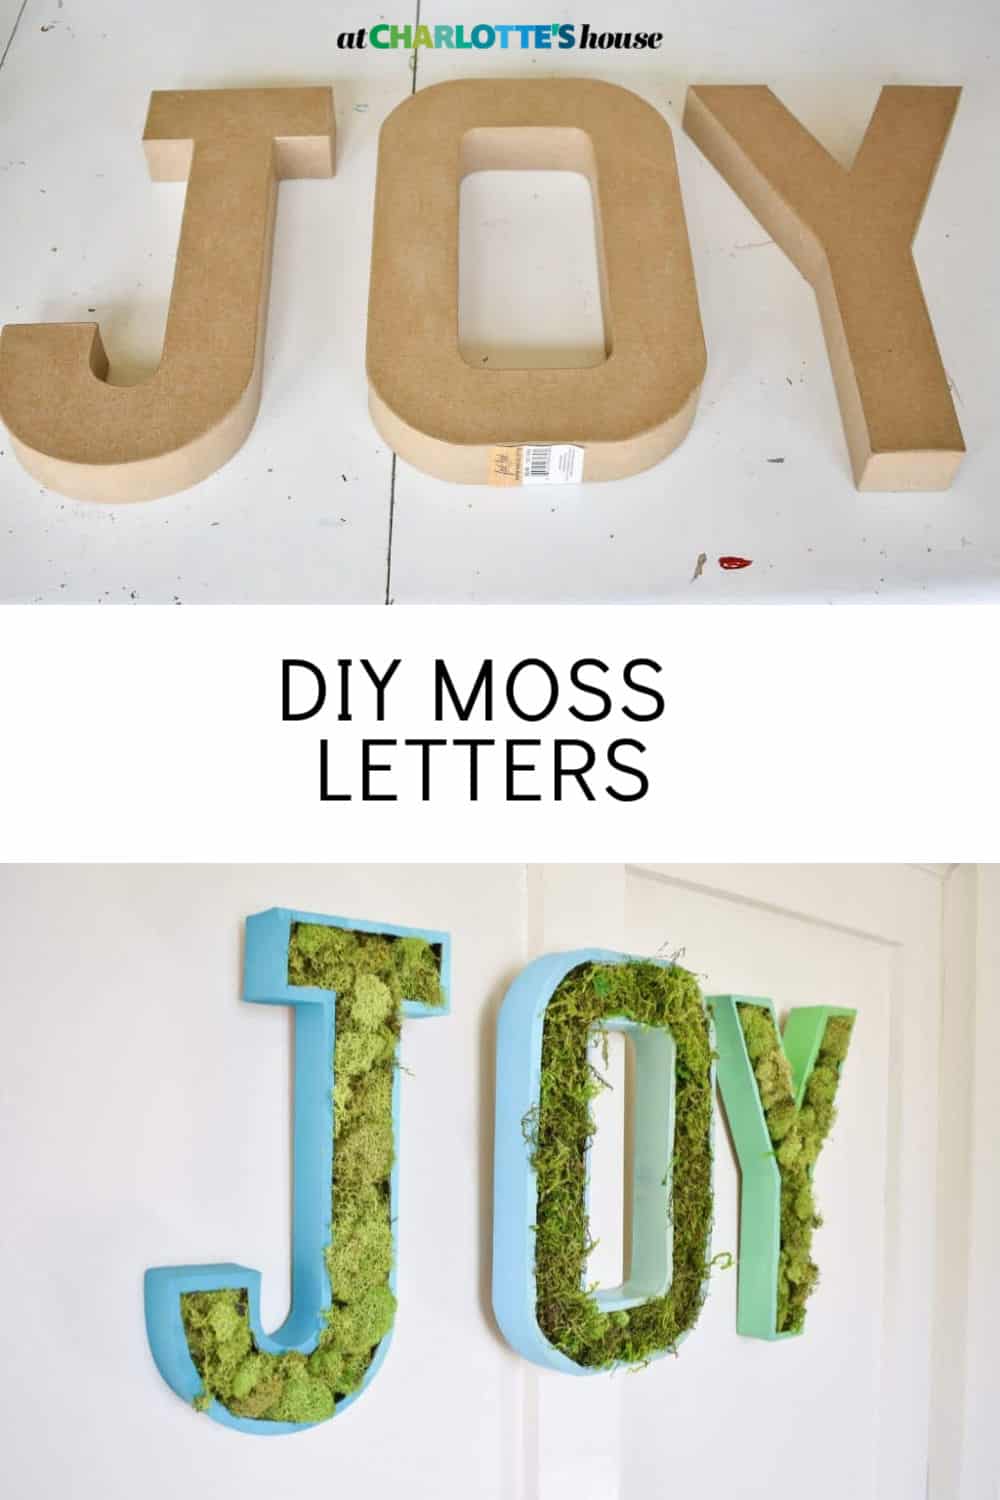 Moss Marquee Letters - At Charlotte's House